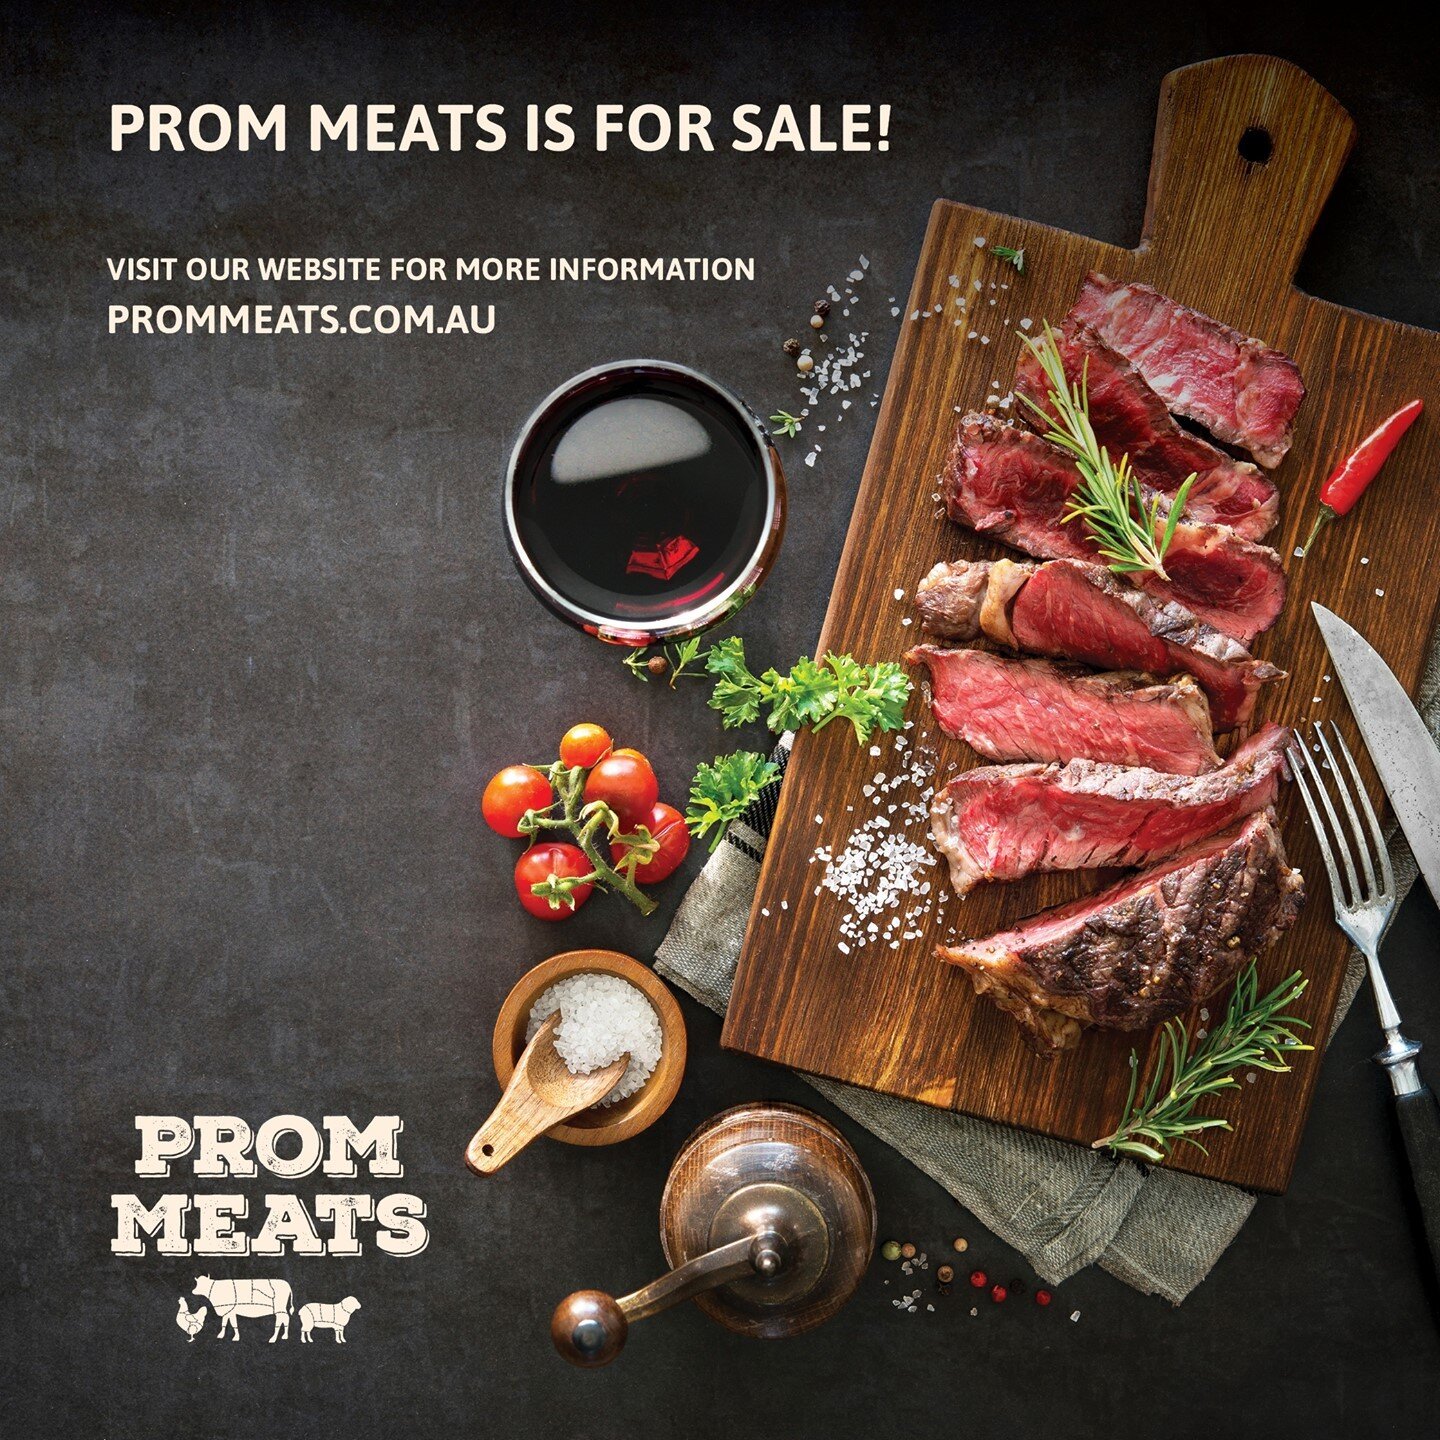 🌳☀️ Butcher by trade? Looking for your next venture? The Prom Meats business is for sale and is located in glorious South Gippsland surrounded by rolling hills and a short drive to iconic Wilsons Promontory. John and Mohya are selling their successf